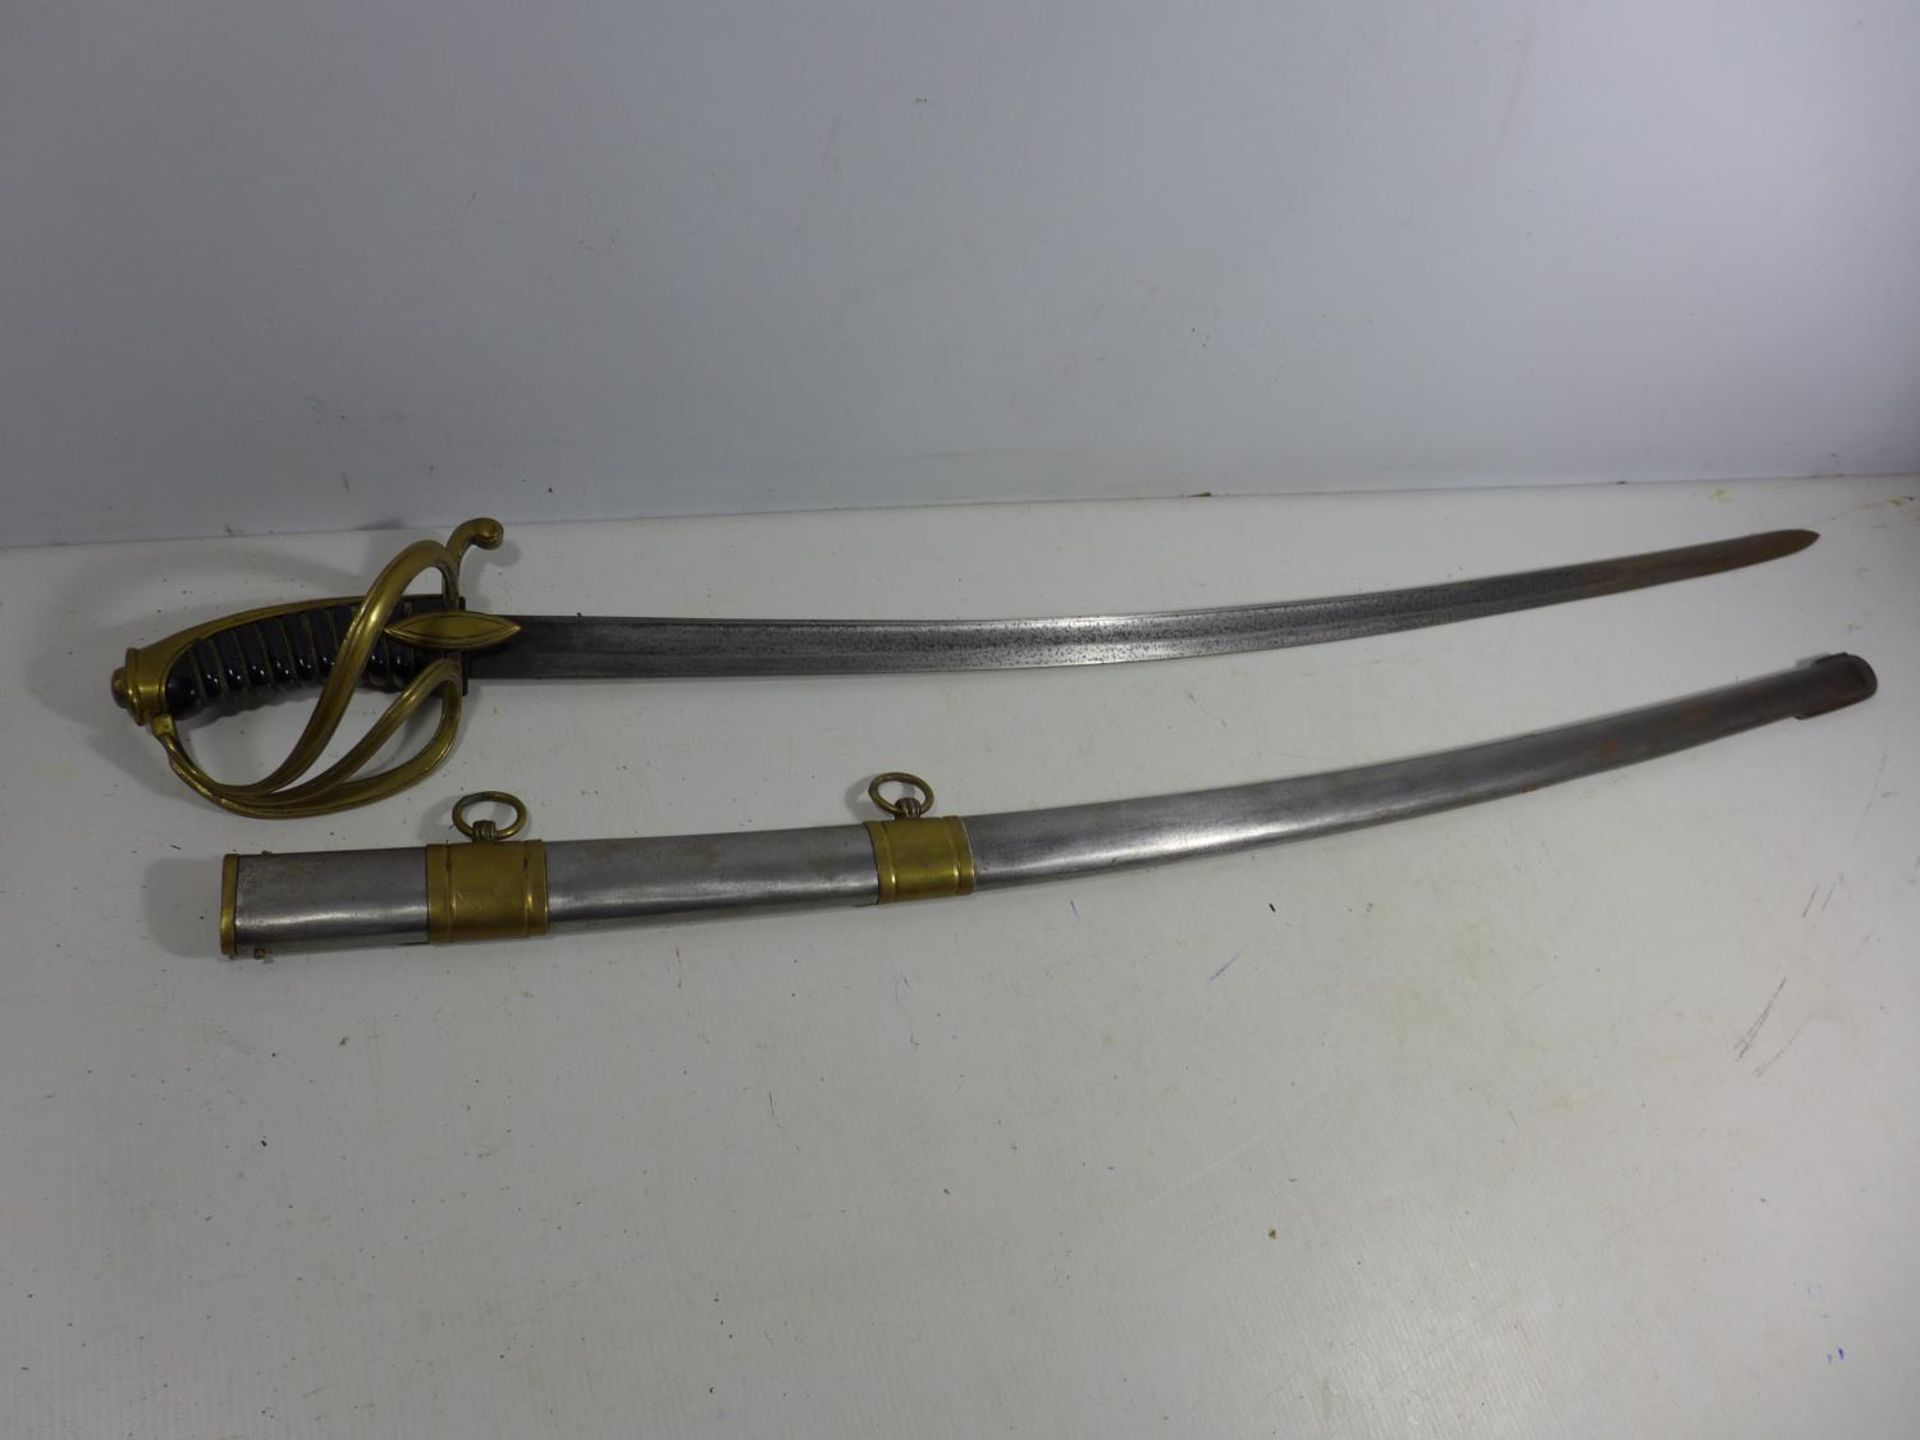 A REPLICA NAPOLEONIC WAR IMPERIAL FRENCH LIGHT CAVALRY SWORD AND SCABBARD, 82CM BLADE, LENGTH 99CM